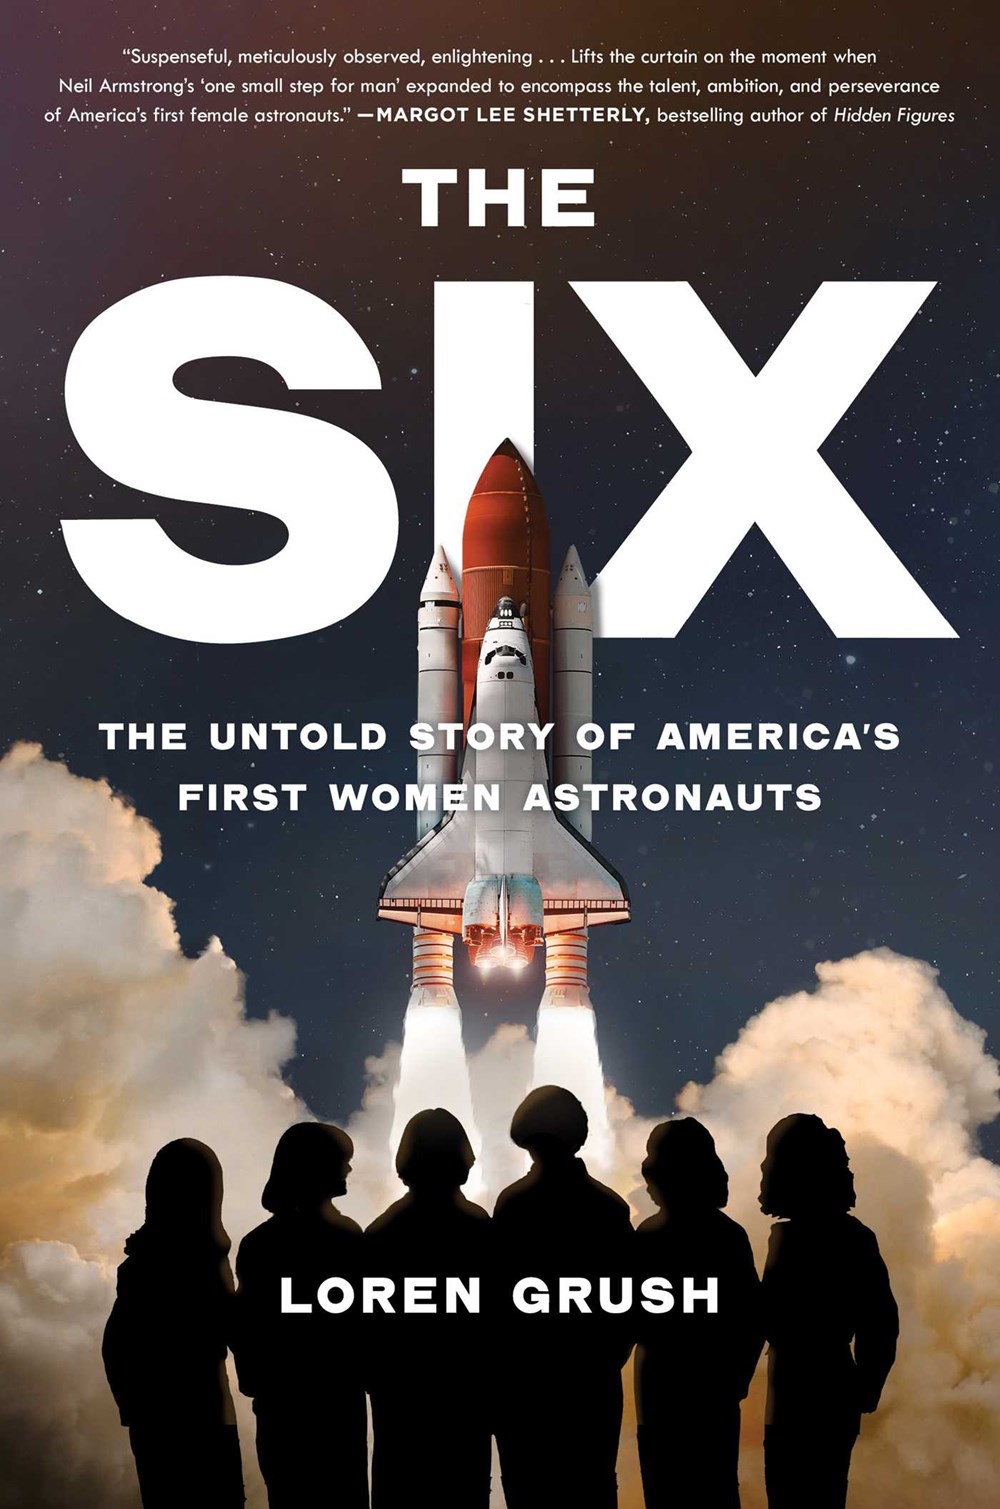 The Six: The Untold Story of America’s First Women Astronauts